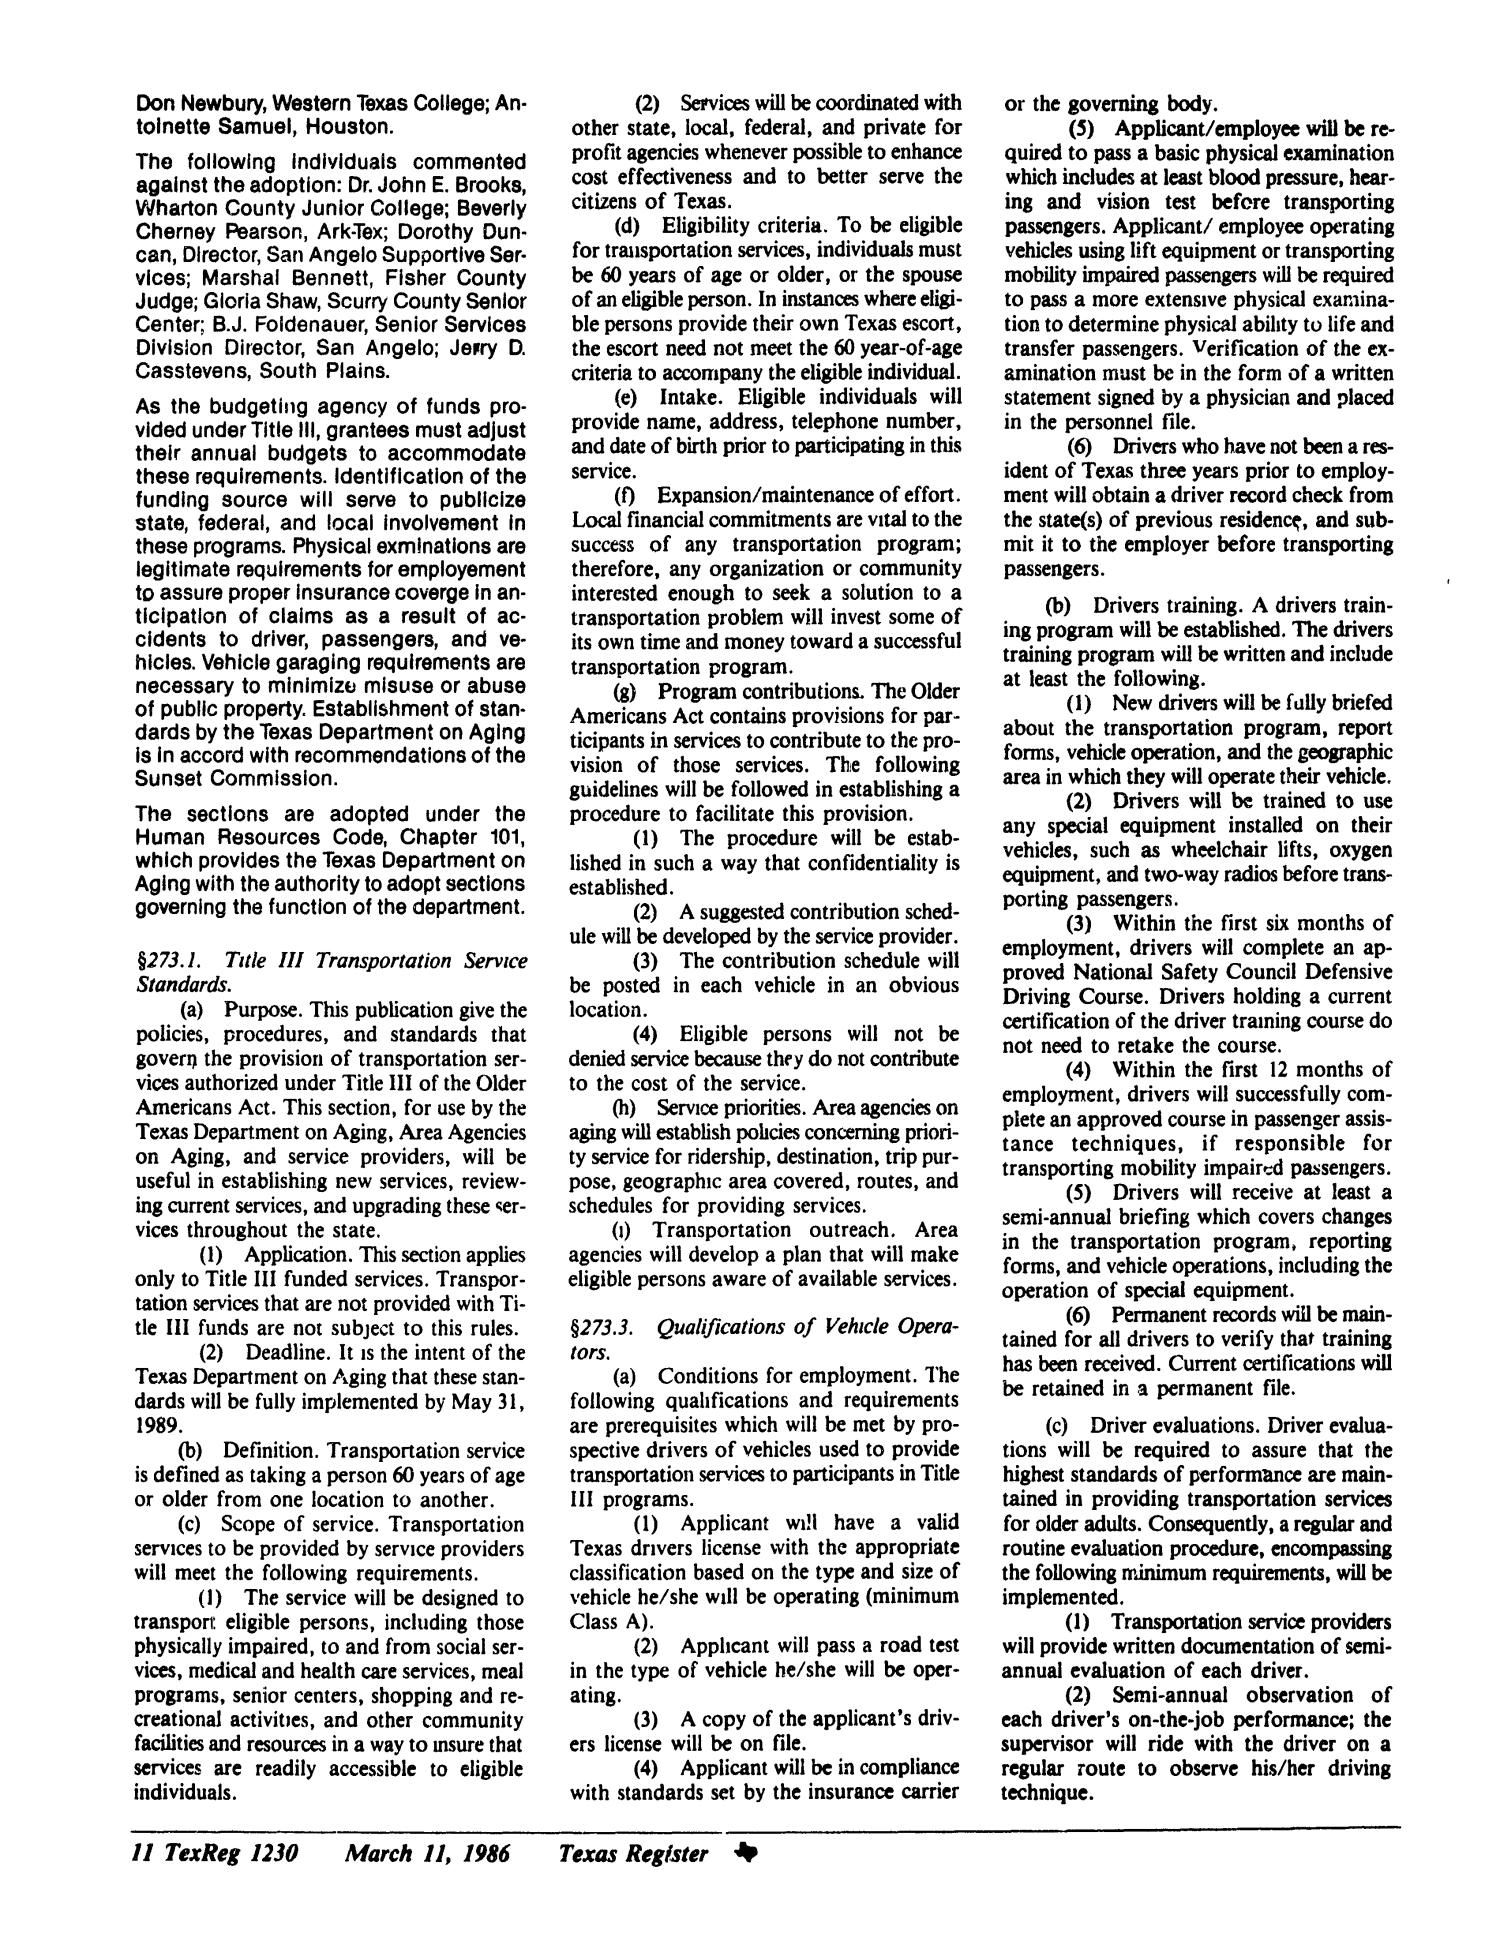 Texas Register, Volume 11, Number 19, Pages 1163-1244, March 11, 1986
                                                
                                                    1230
                                                